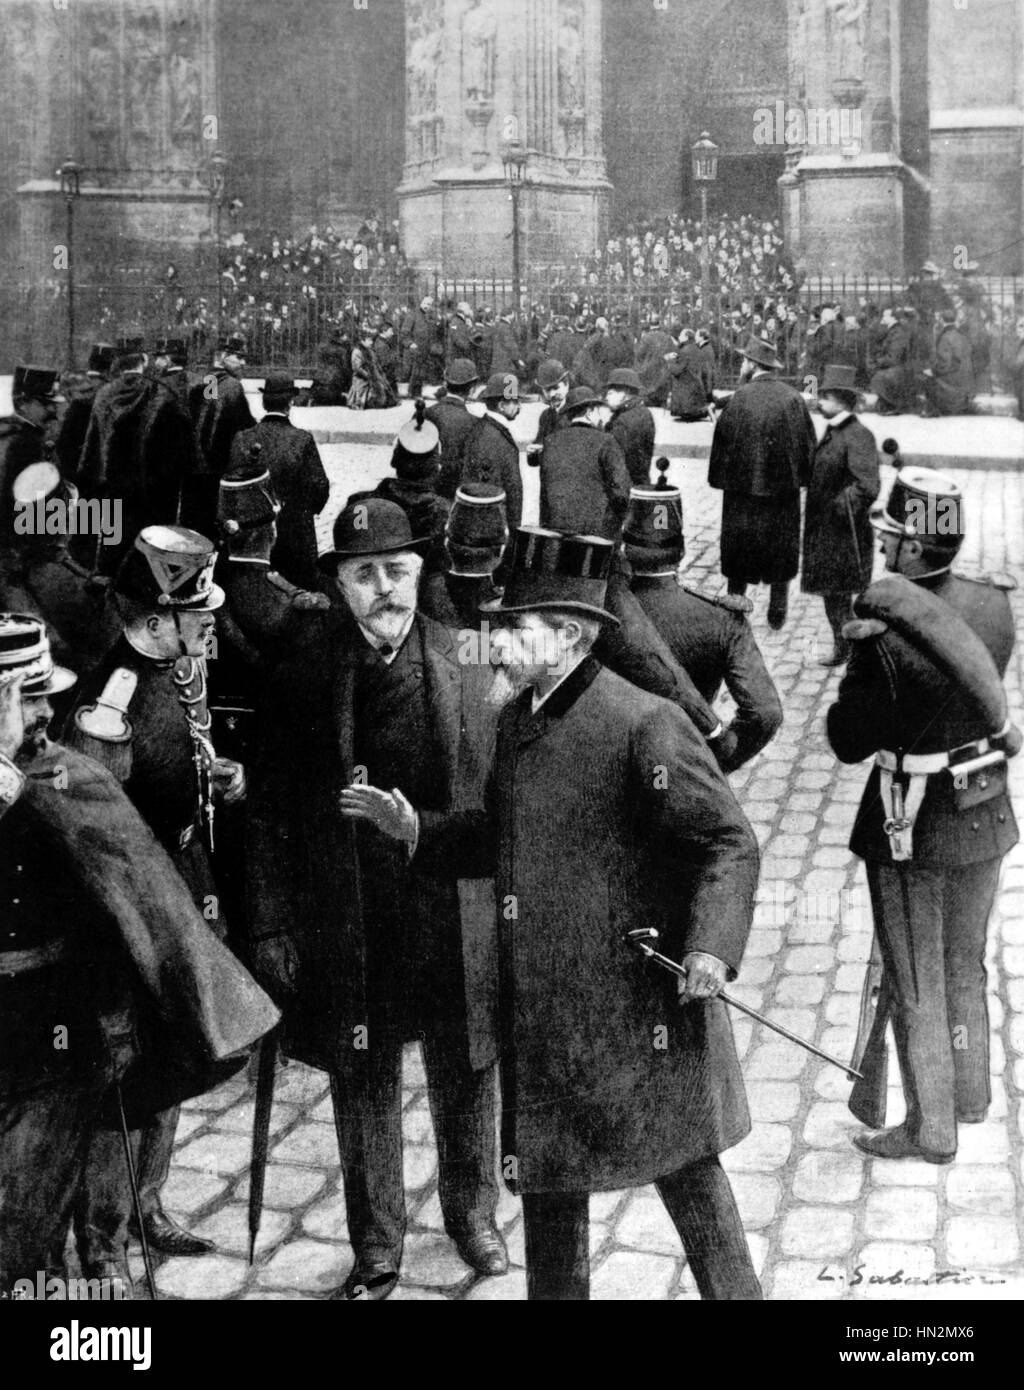 France Separation of church and state. In front of Ste. Clotilde: Mr Lepine, police chief, and Mr Touny give orders to agents while people pray and sing. 1906 Stock Photo